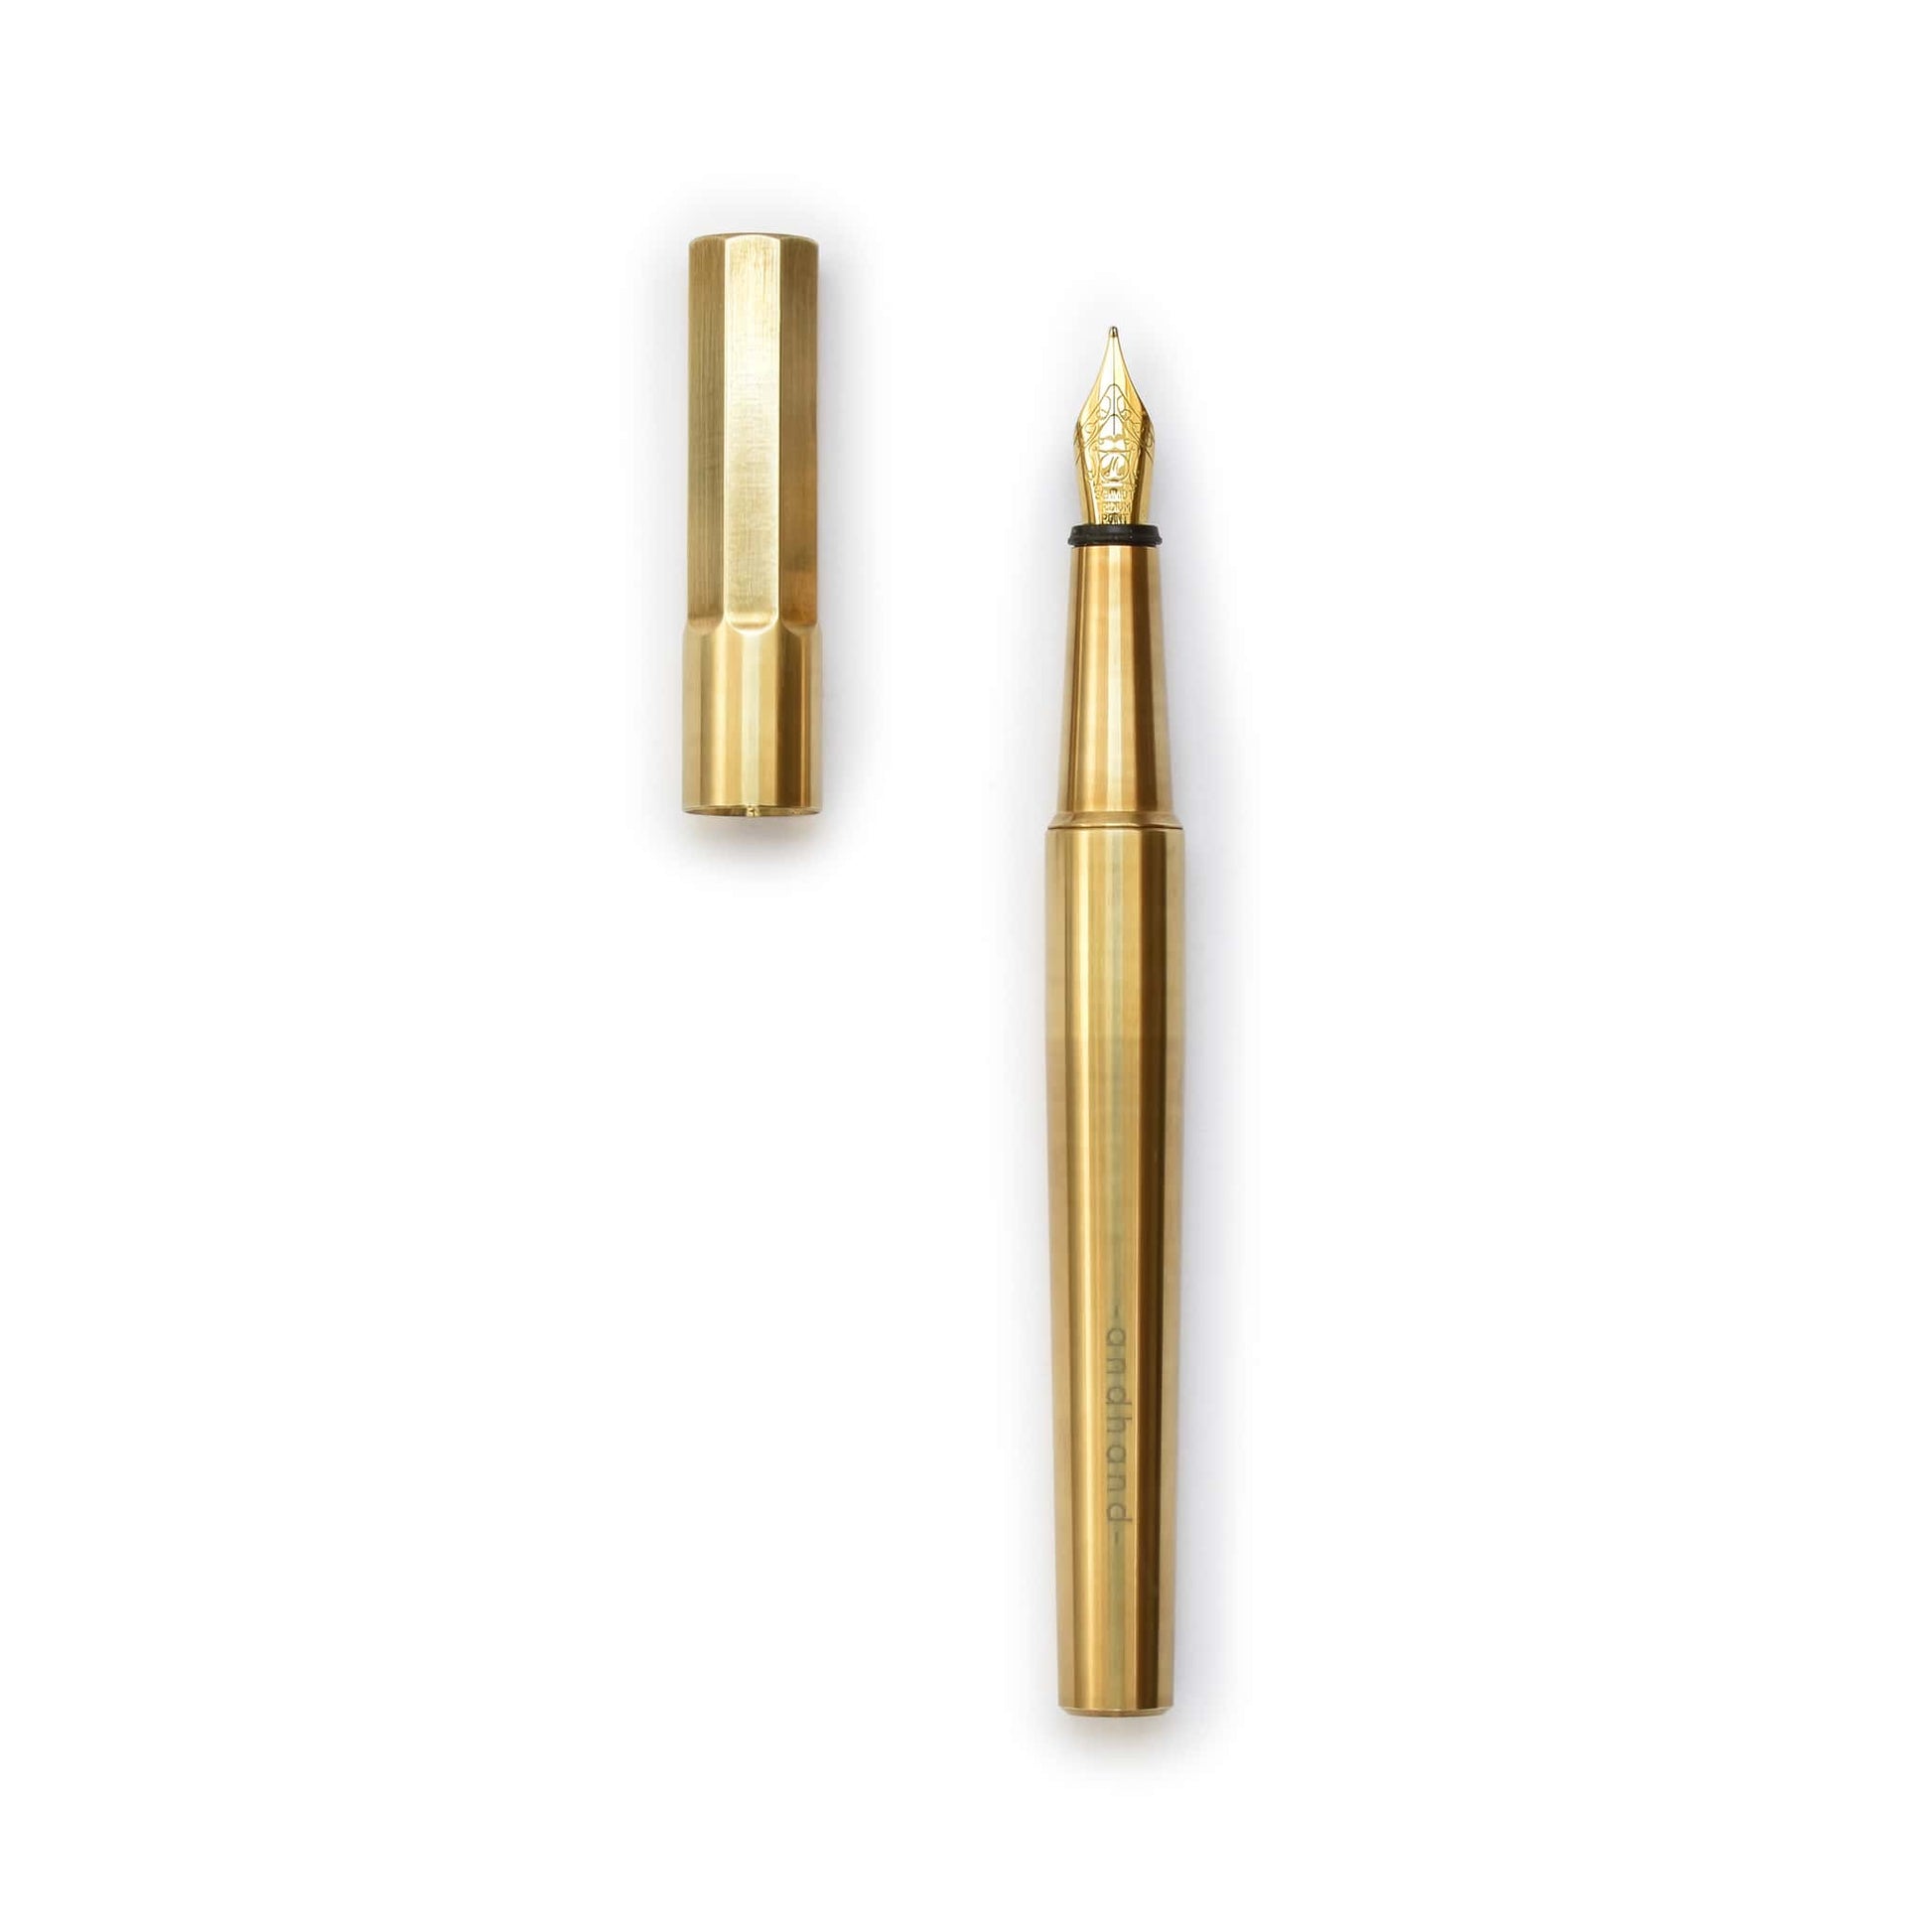 Method Fountain Pen by Andhand. Brass pen with gold plated nib. Ideal fountain pen for writing.